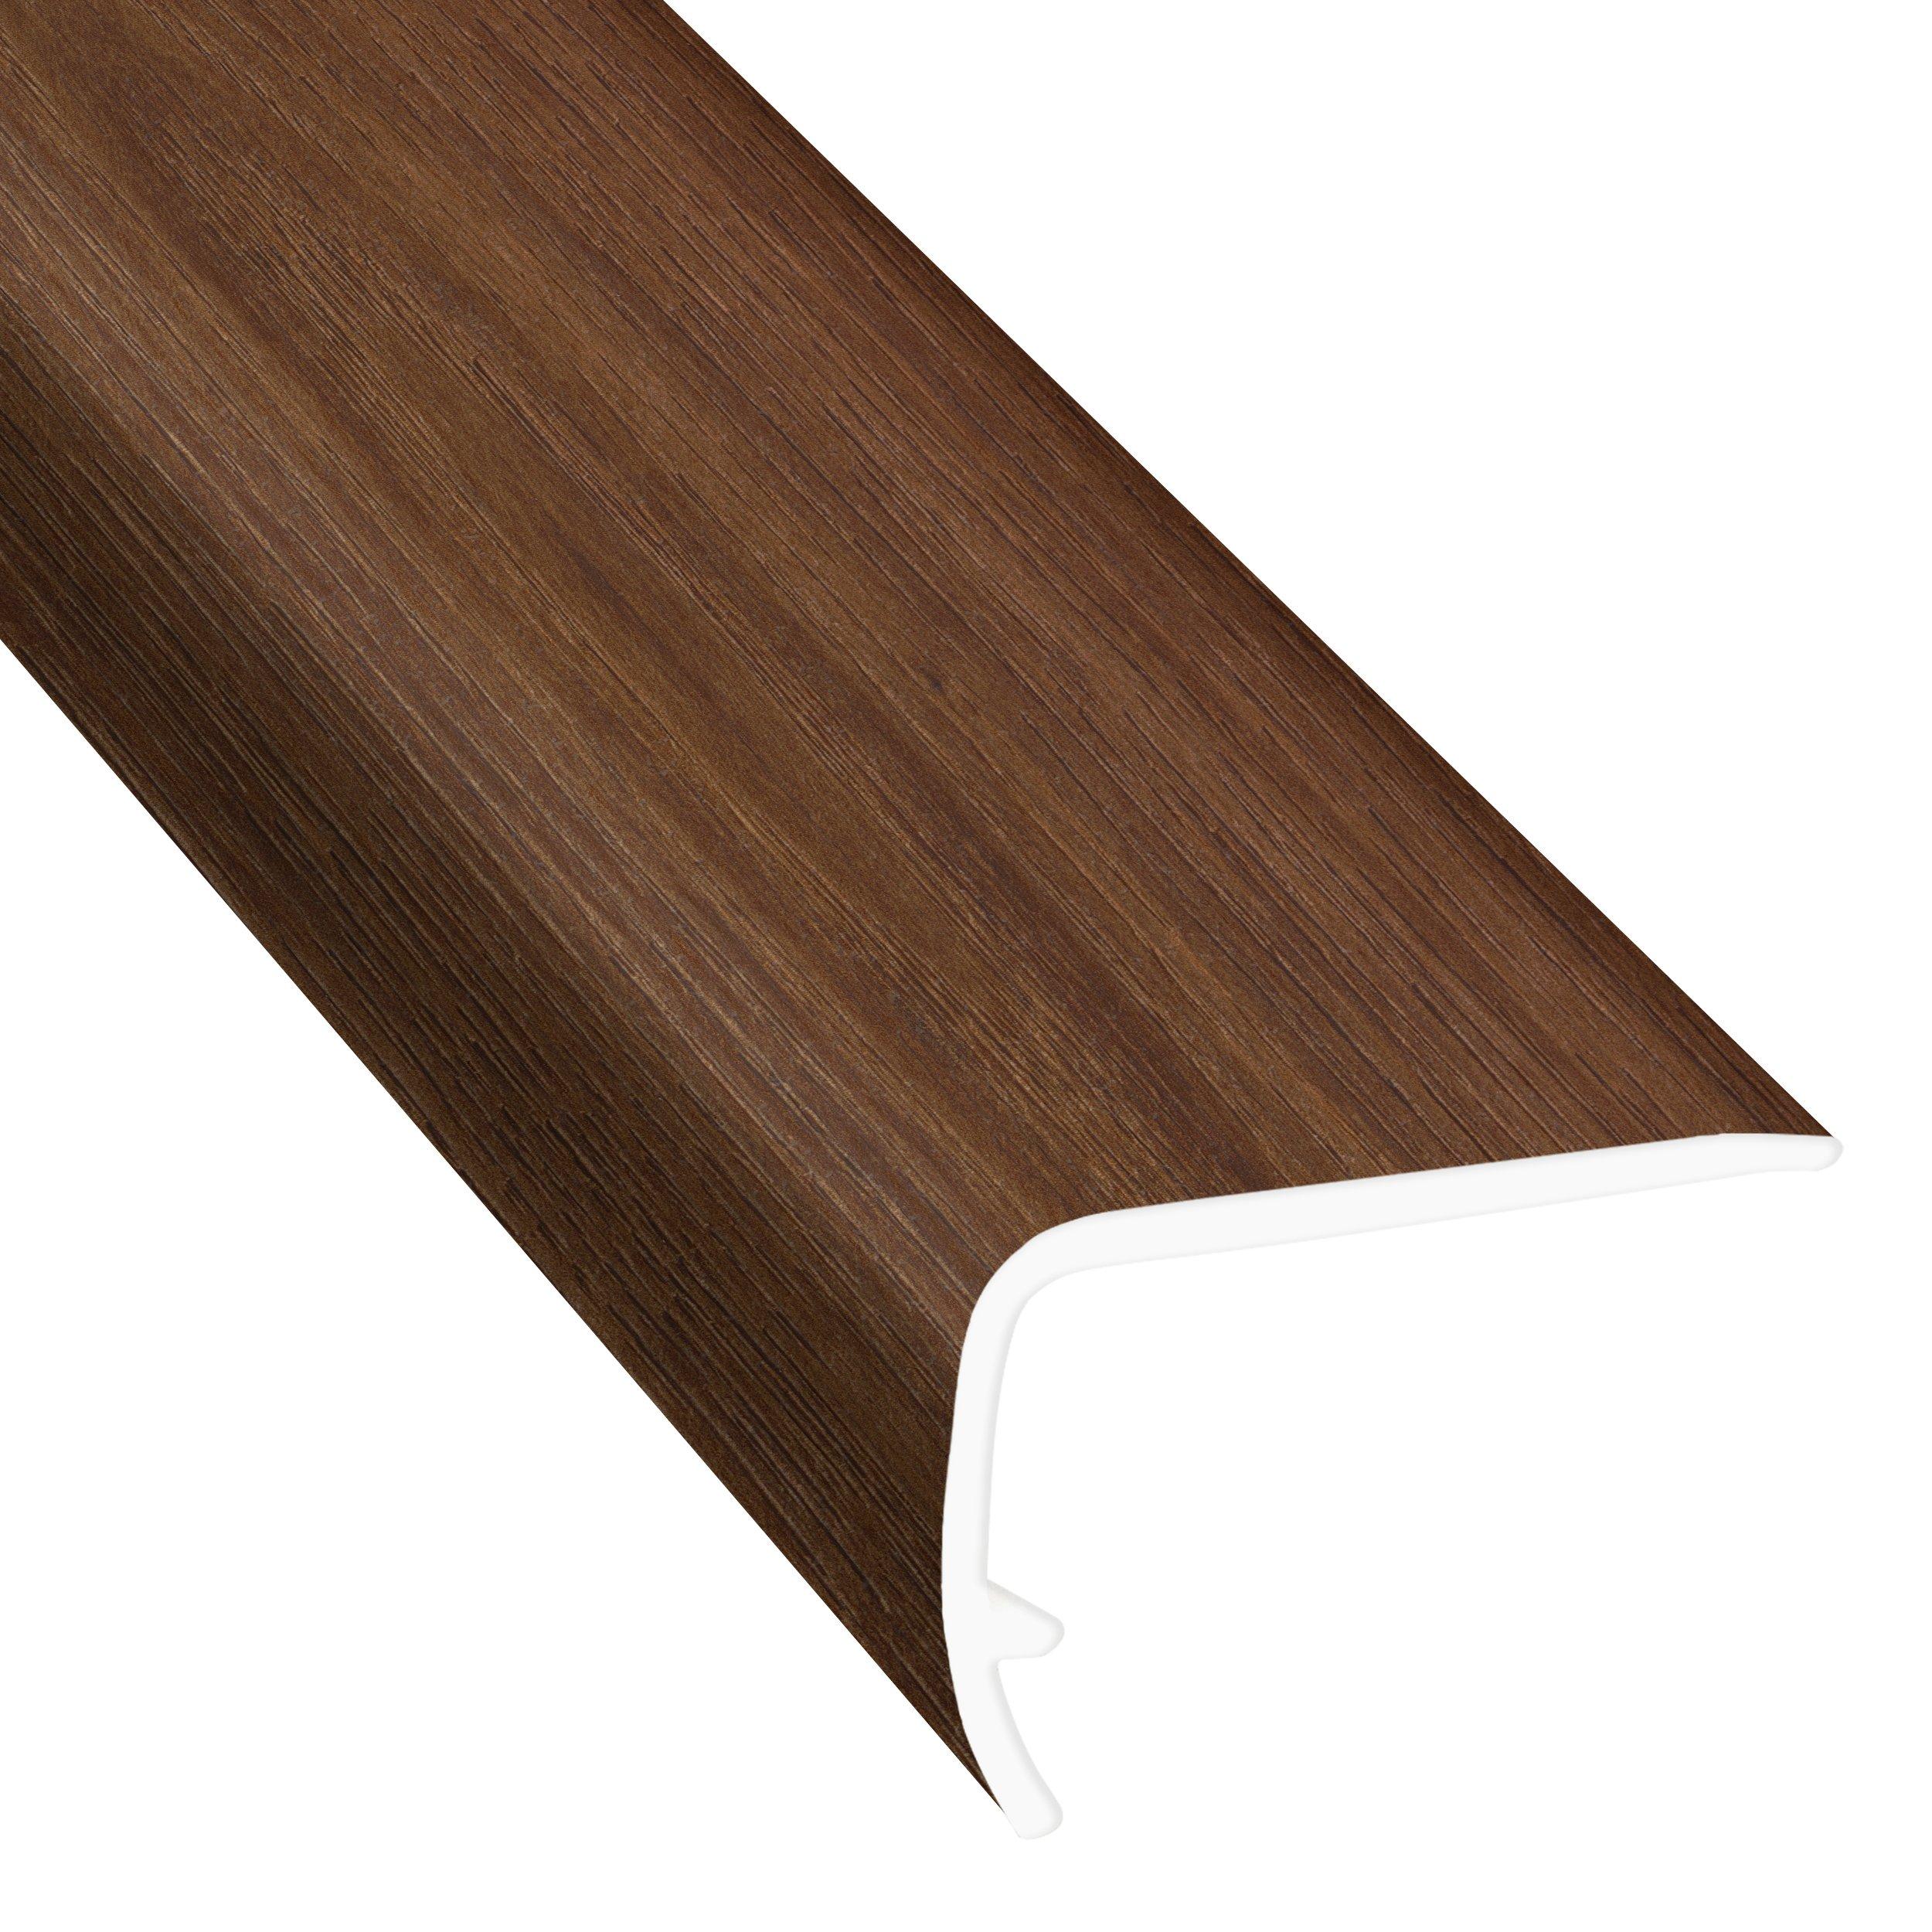 Brookside 94in. Vinyl Overlapping Stair Nose